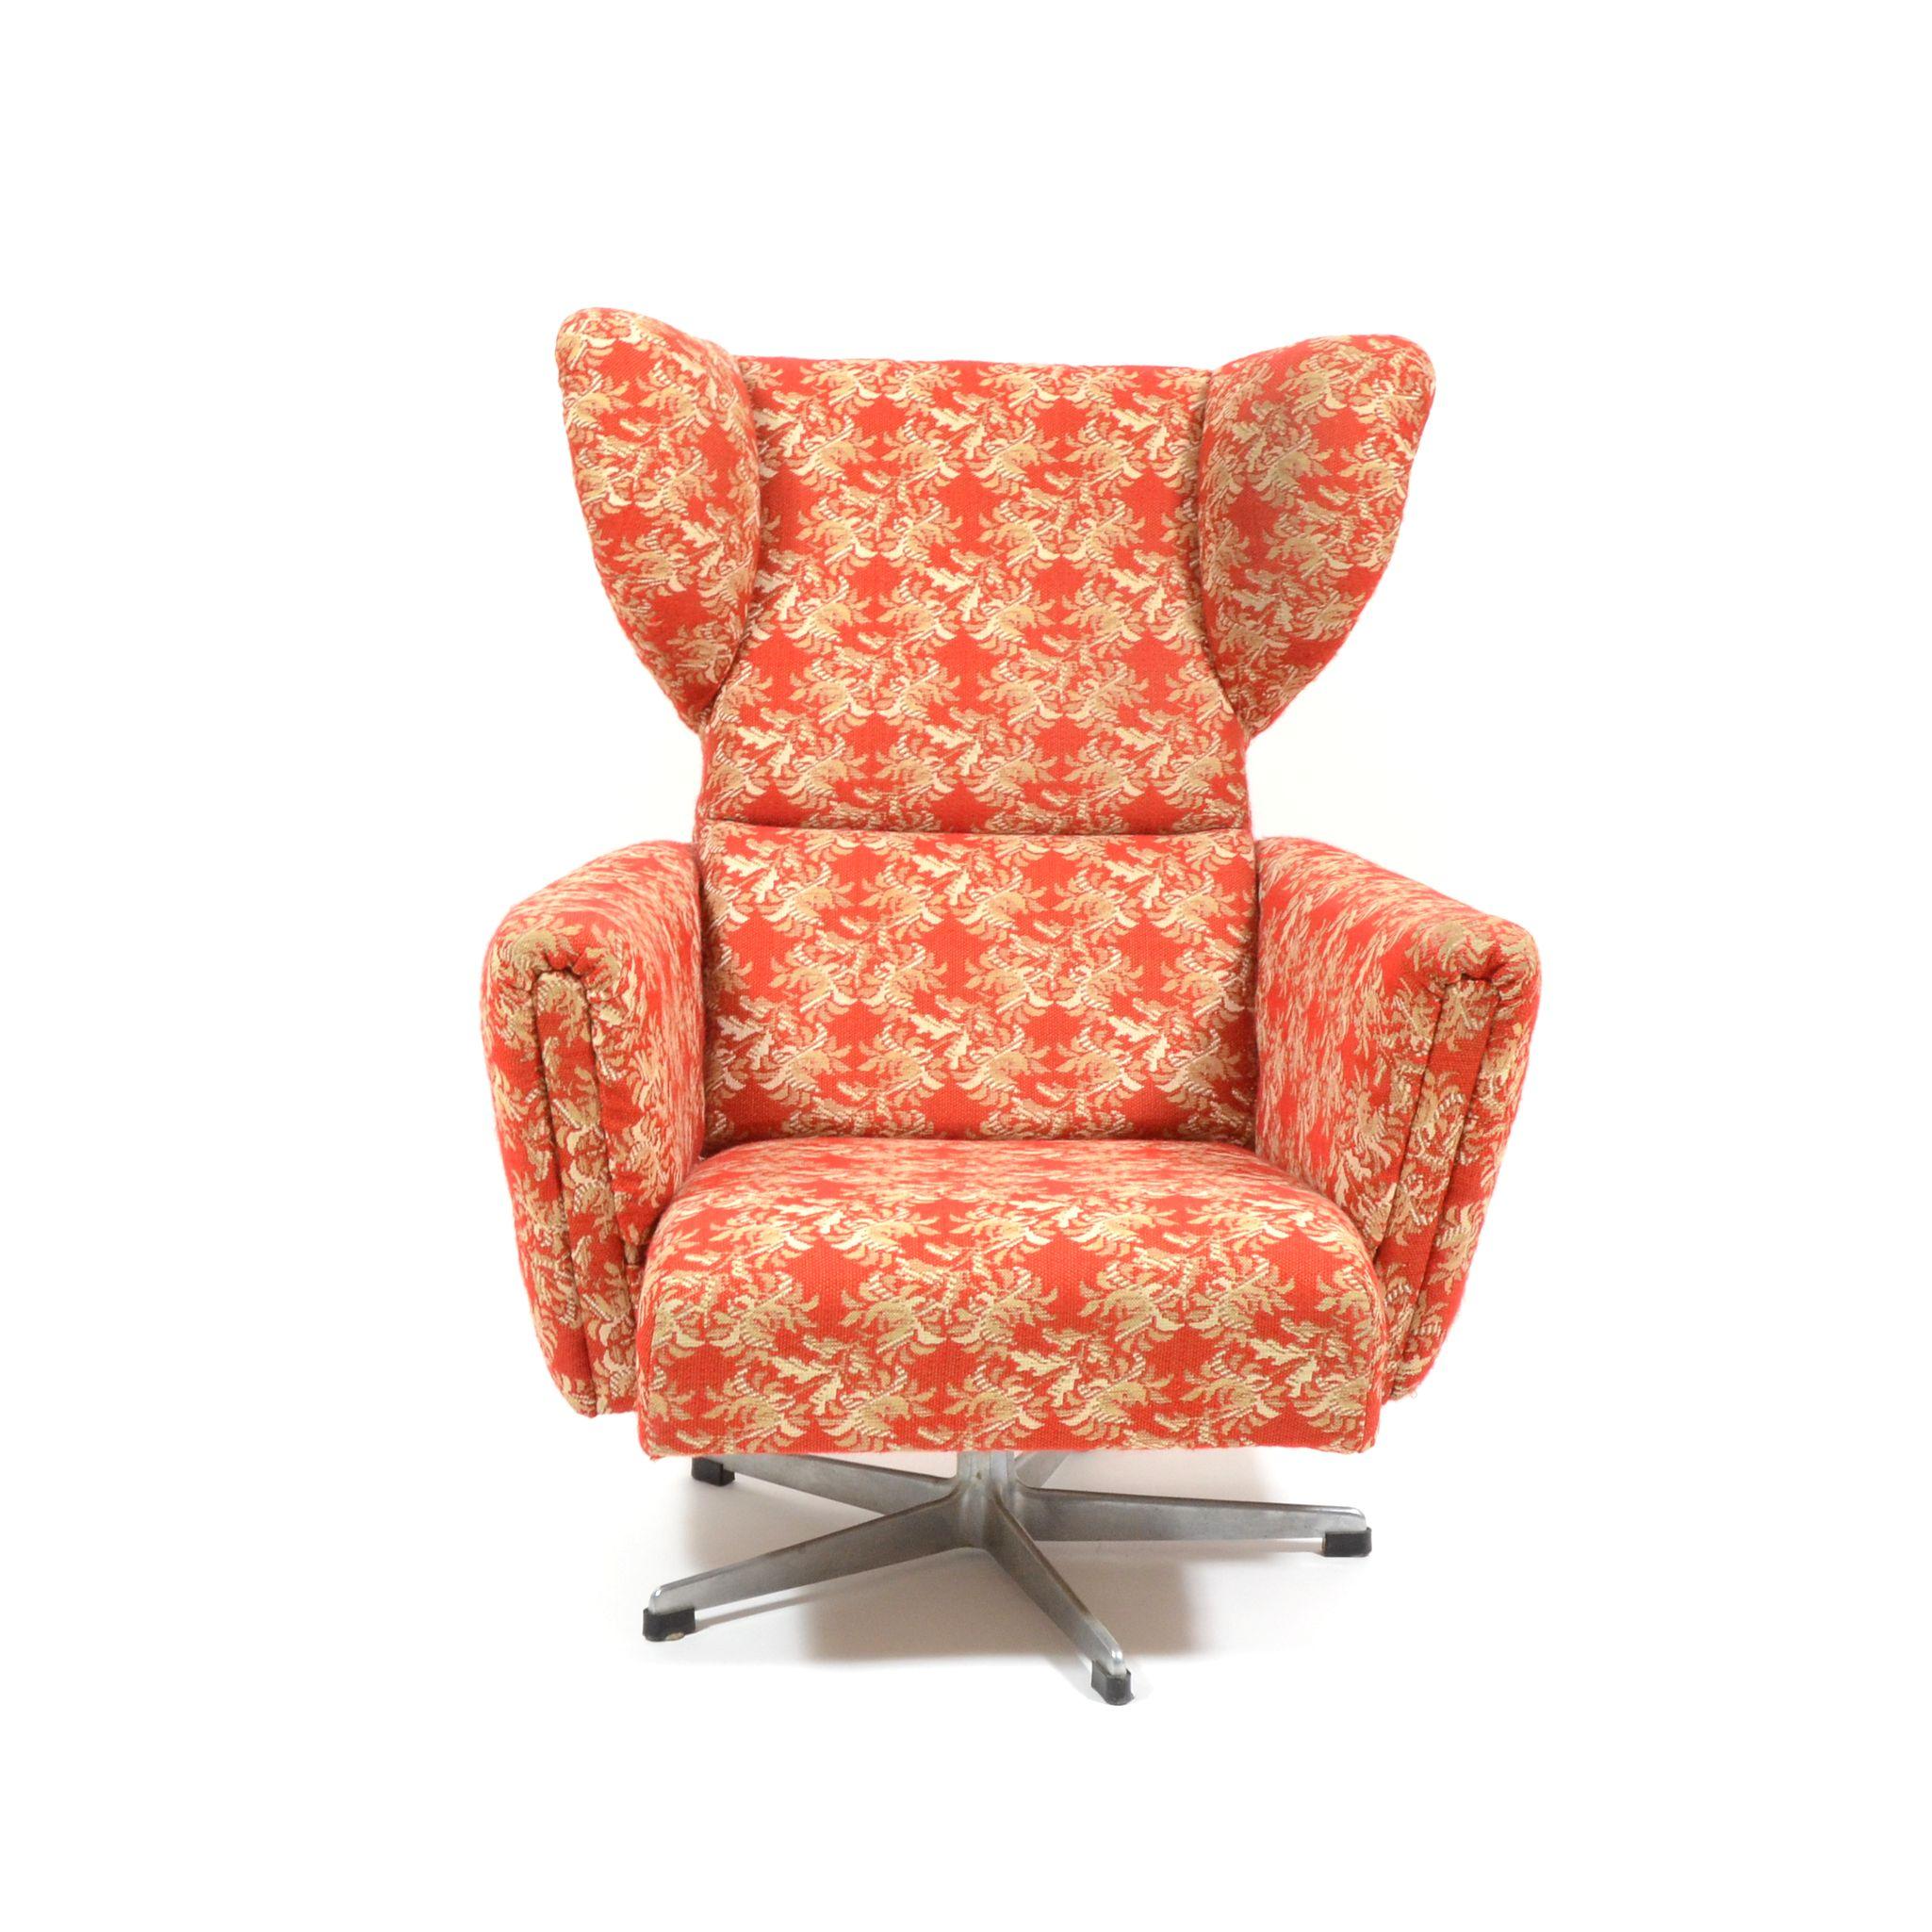 European Vintage Czech Wing Chair on Rotary Leg by UP Závody, 1970s For Sale